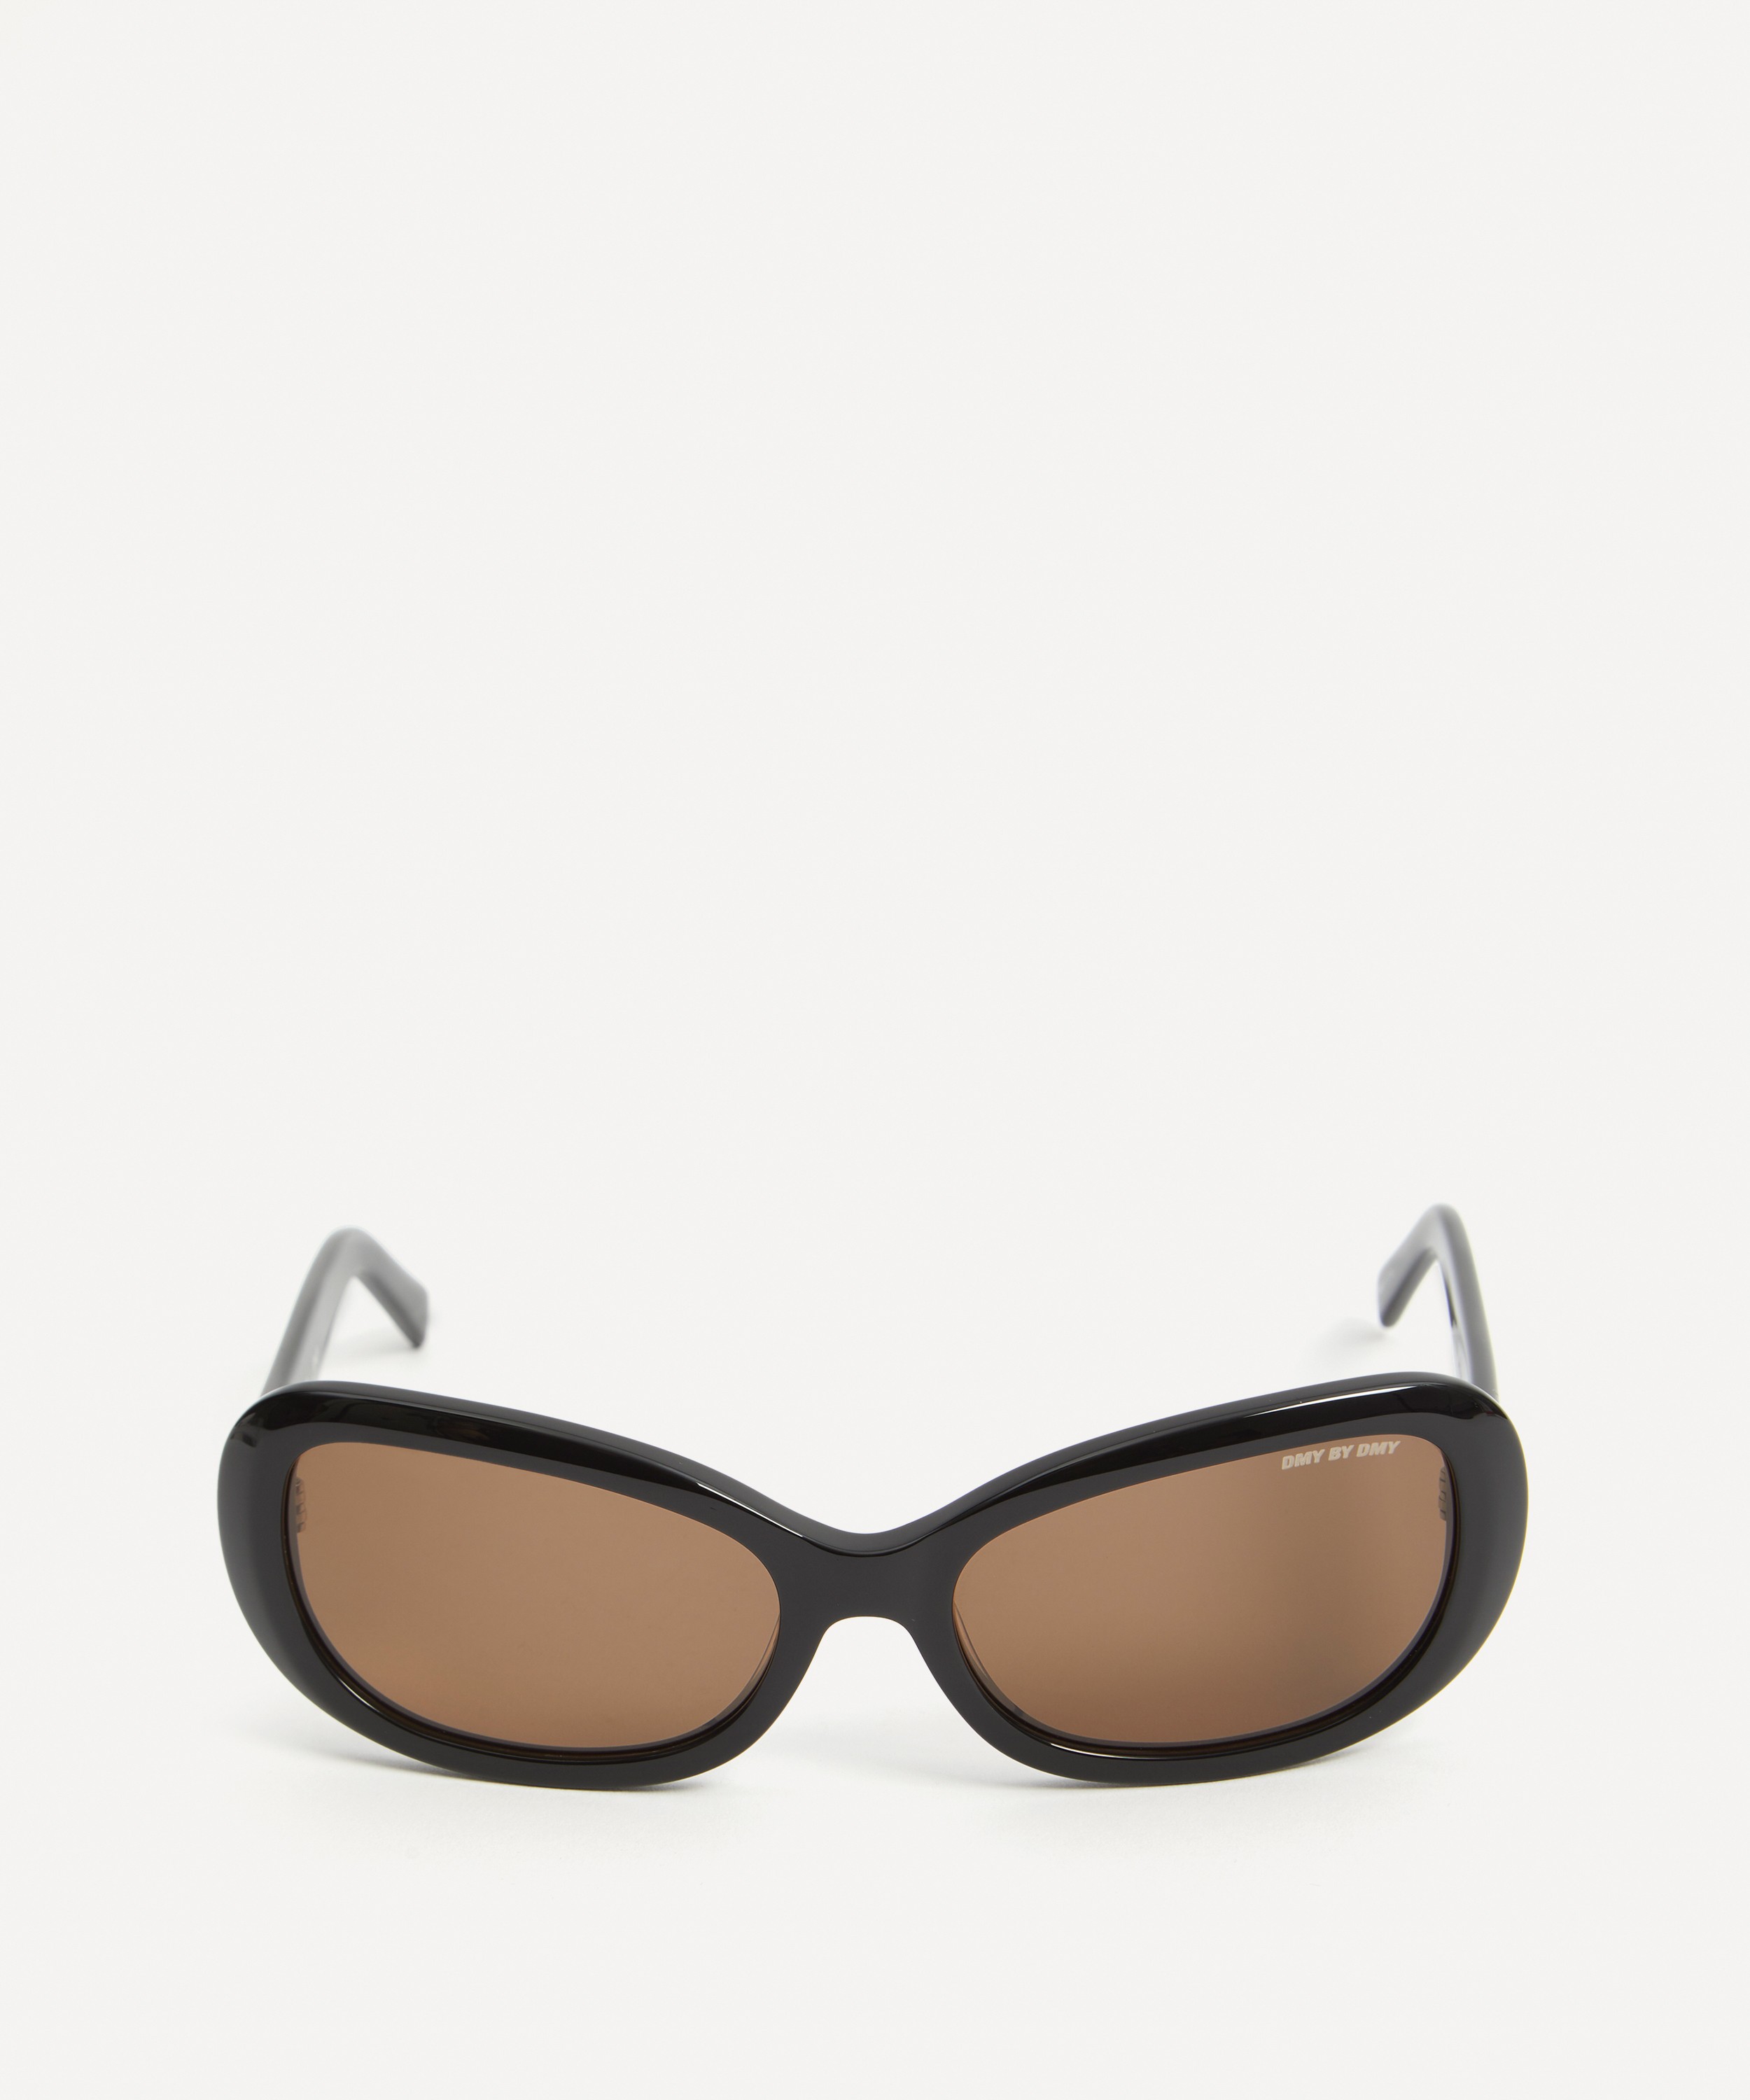 DMY BY DMY - Andy Bug-Eye Acetate Sunglasses image number 0